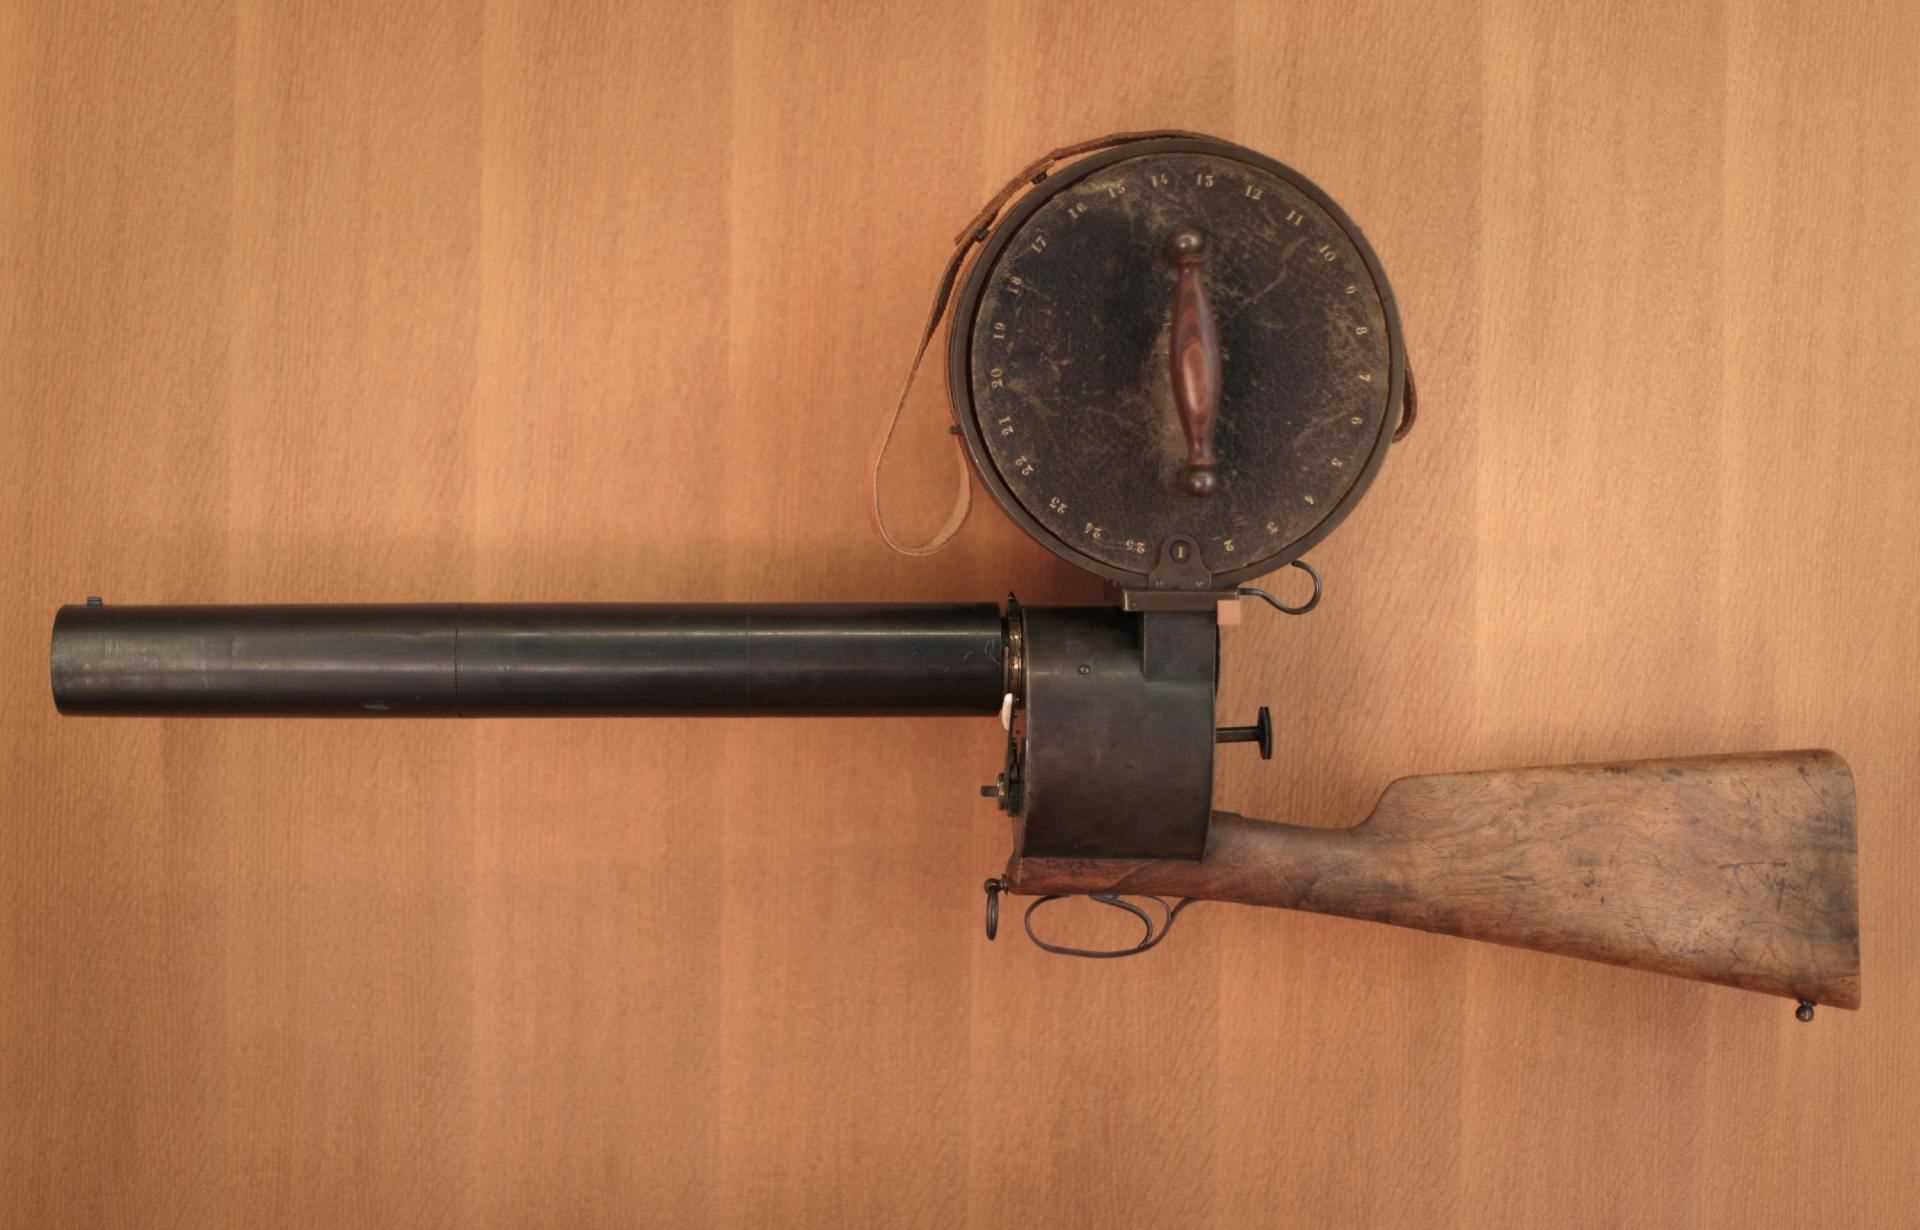 Etienne-Jules Marey's chronophotographic rifle, with which he sought to break down the movements of animals, contributed in 1882 to the maturation of the capture of moving images.